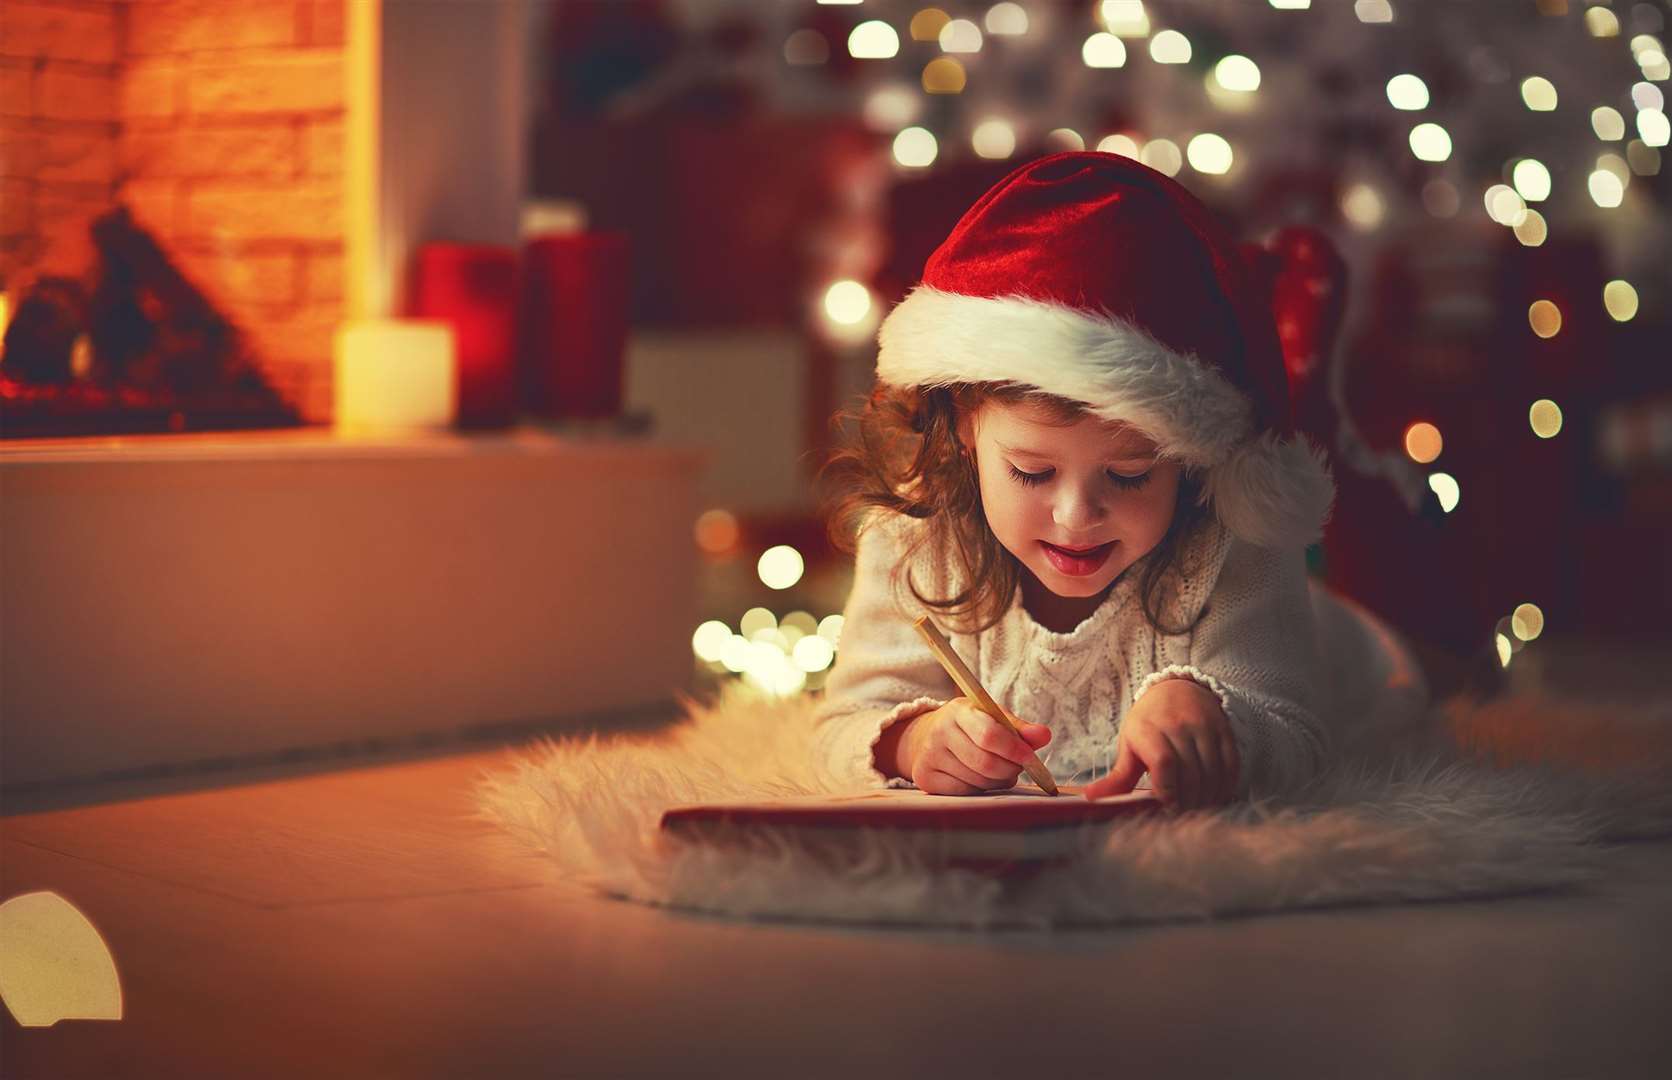 Have your children started their letter to Santa yet?